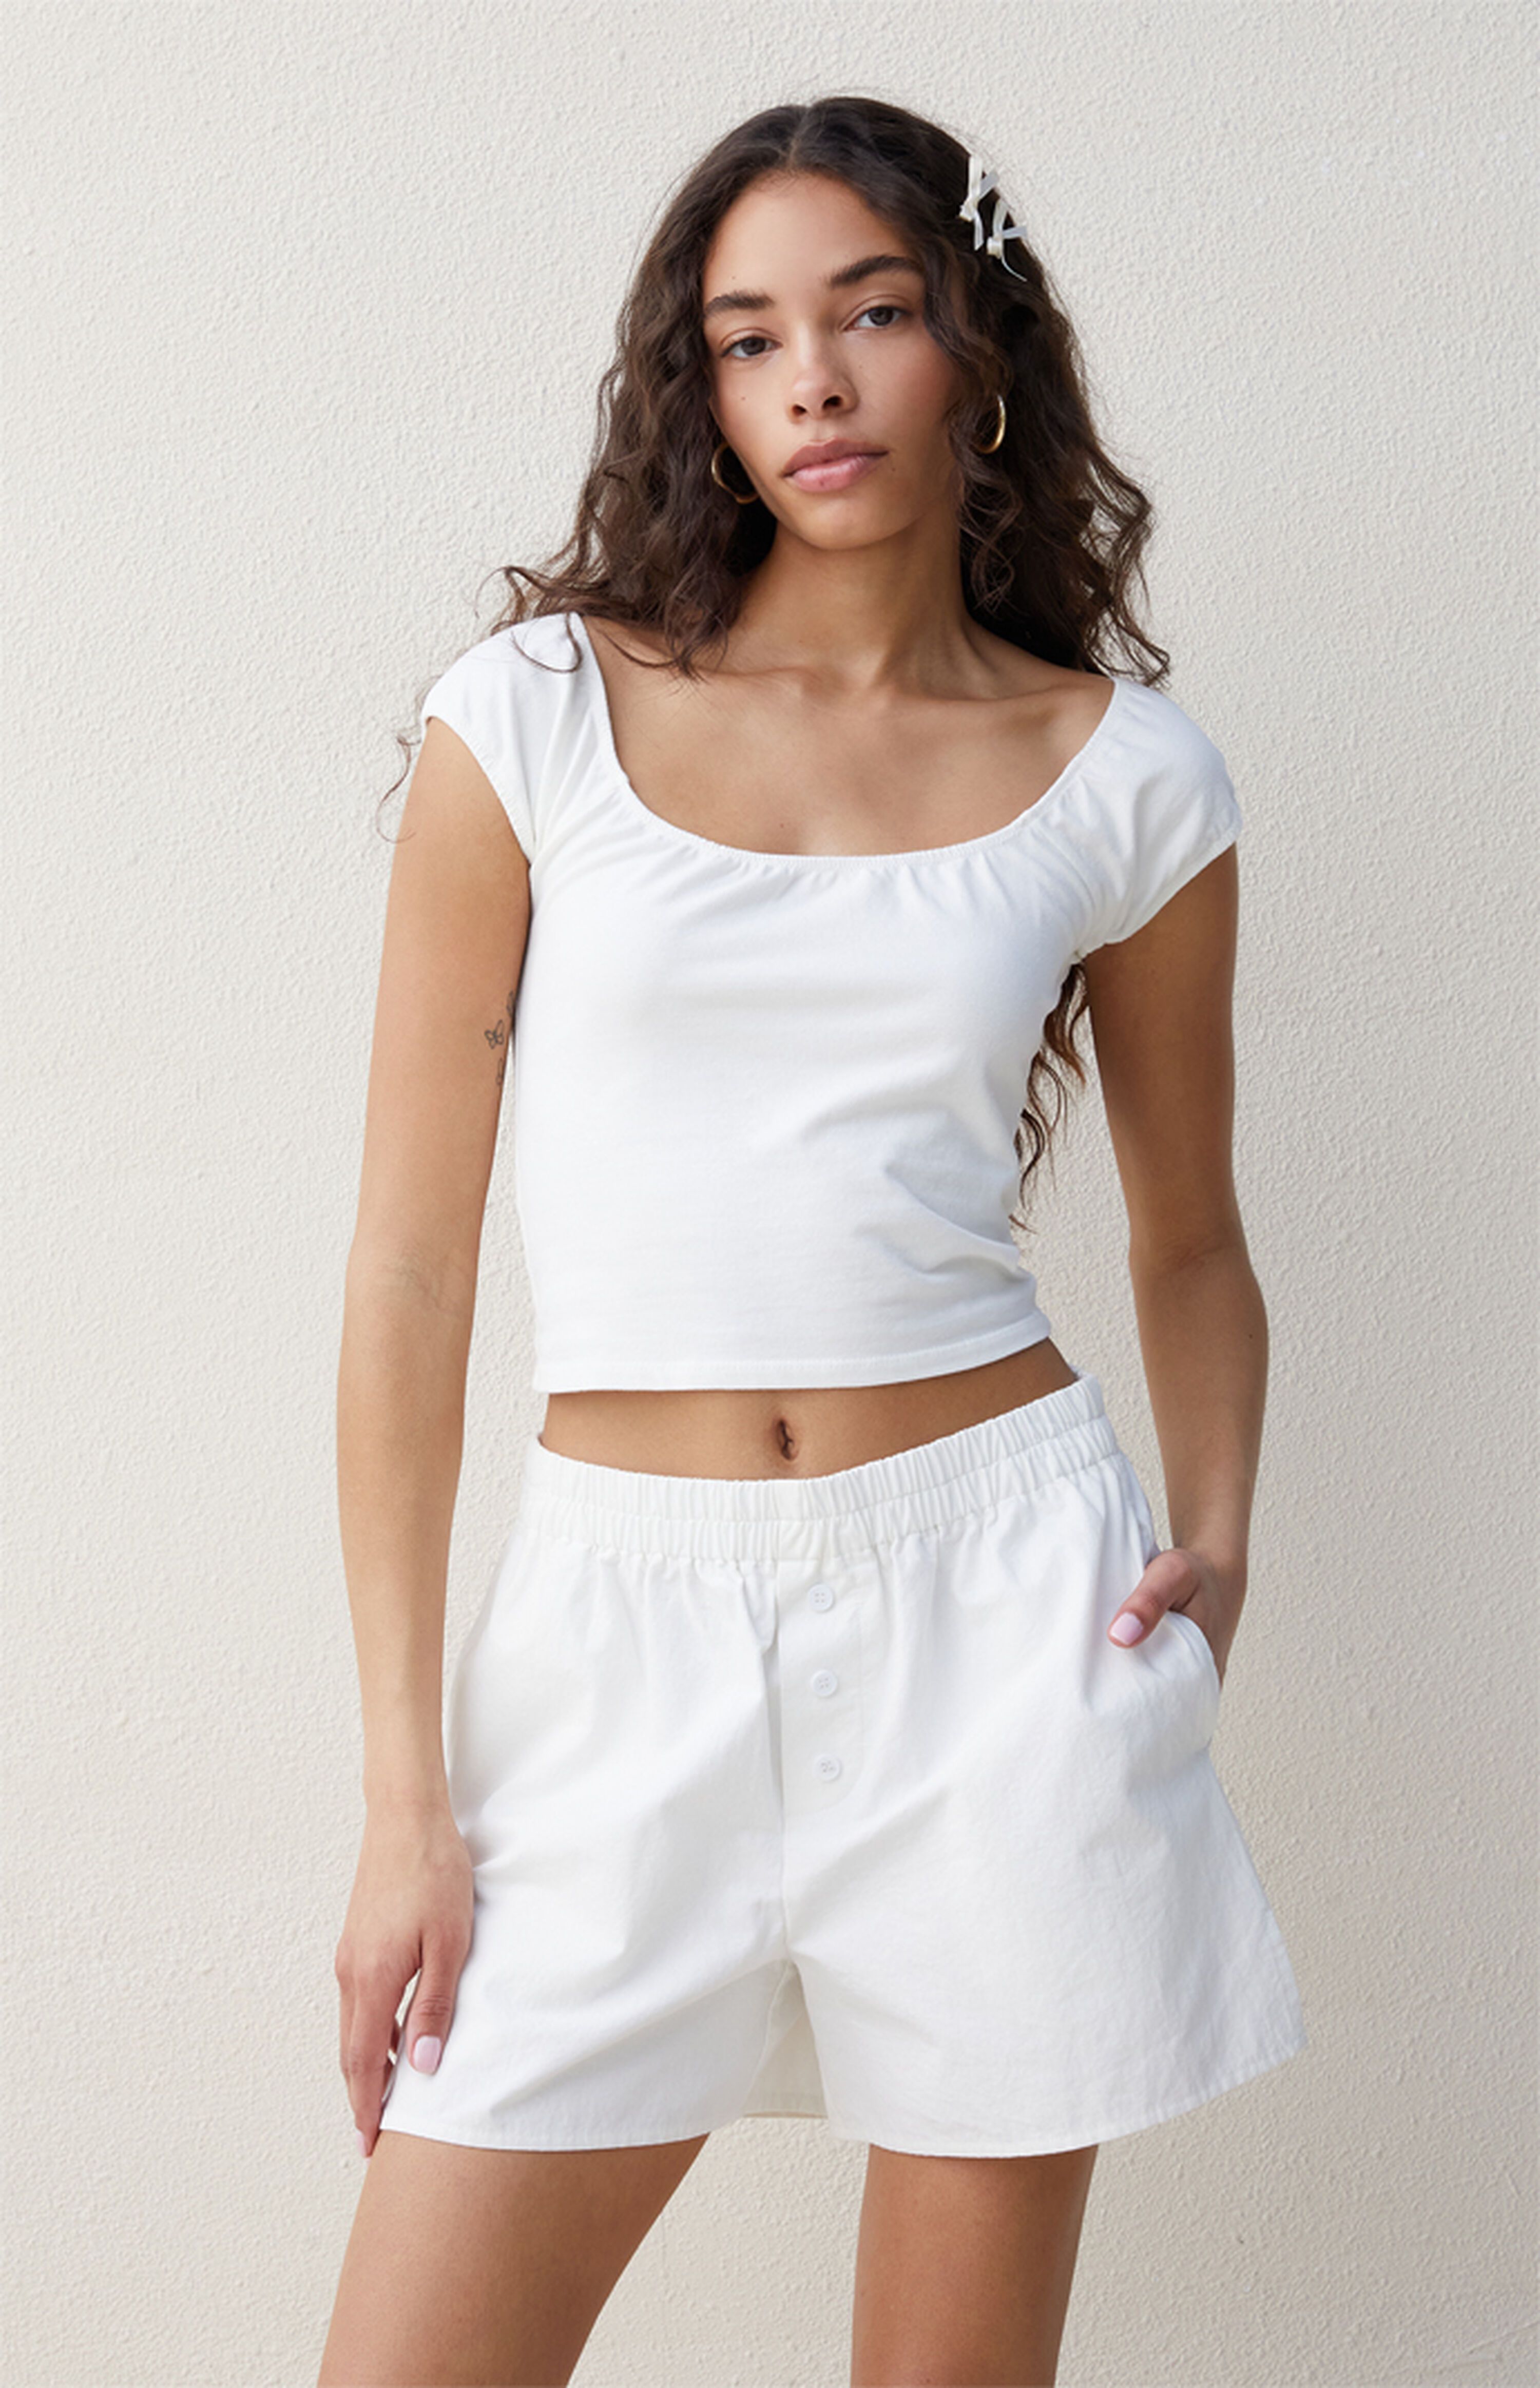 Beverly & Beck White Boxer Shorts | PacSun